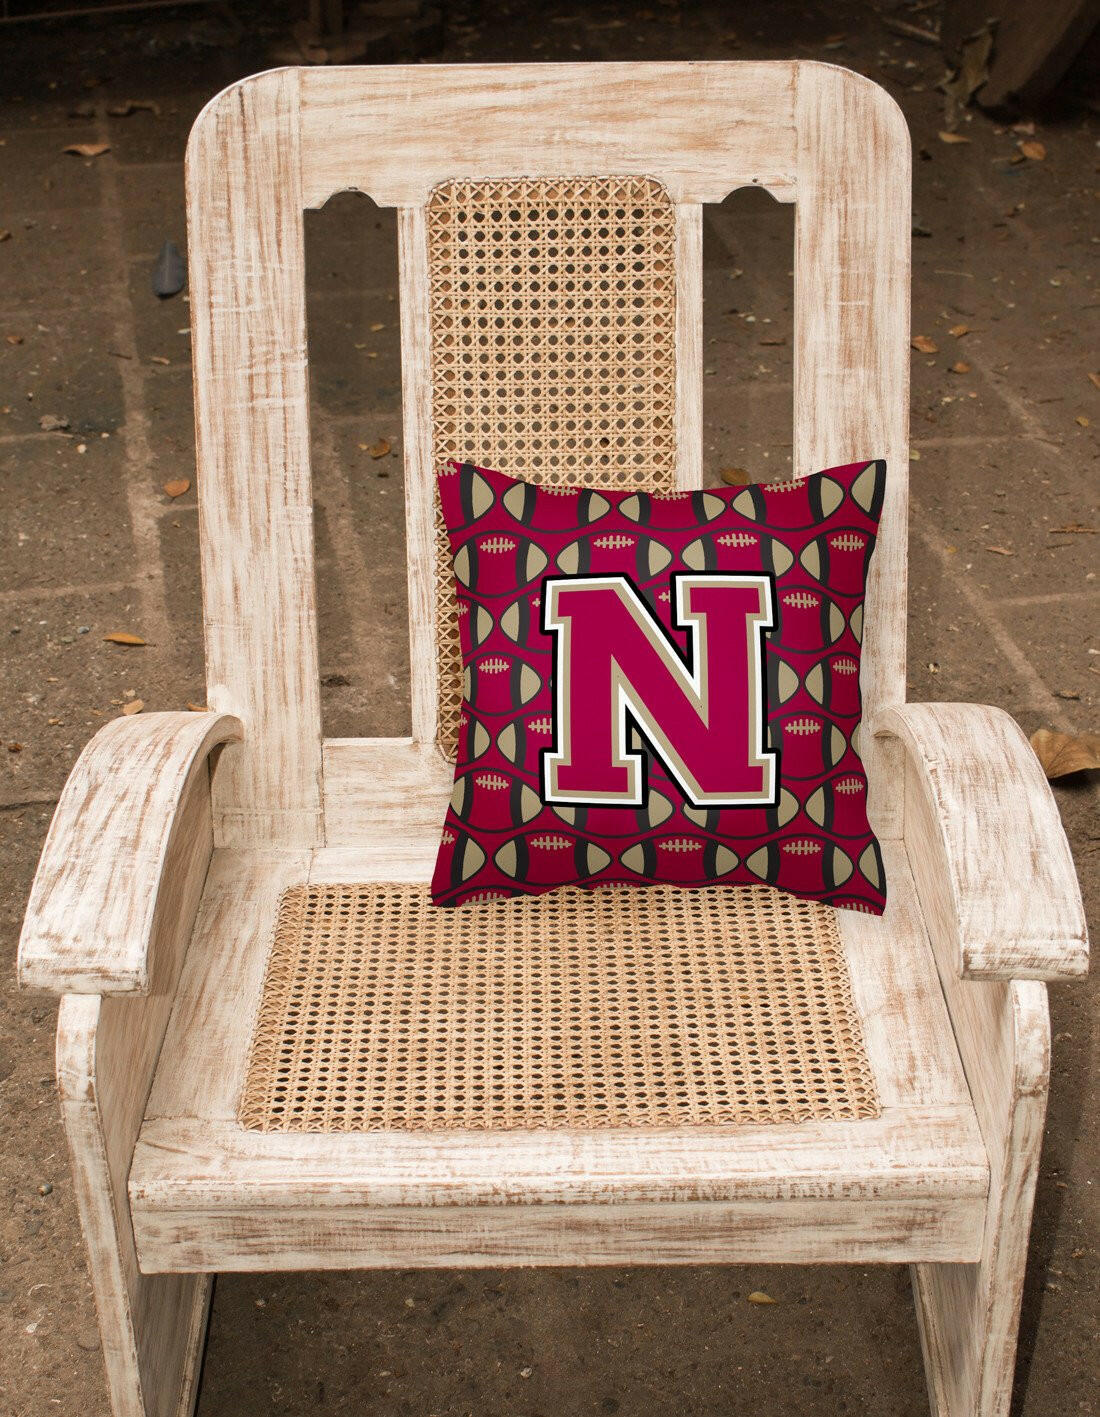 Letter N Football Garnet and Gold Fabric Decorative Pillow CJ1078-NPW1414 by Caroline's Treasures